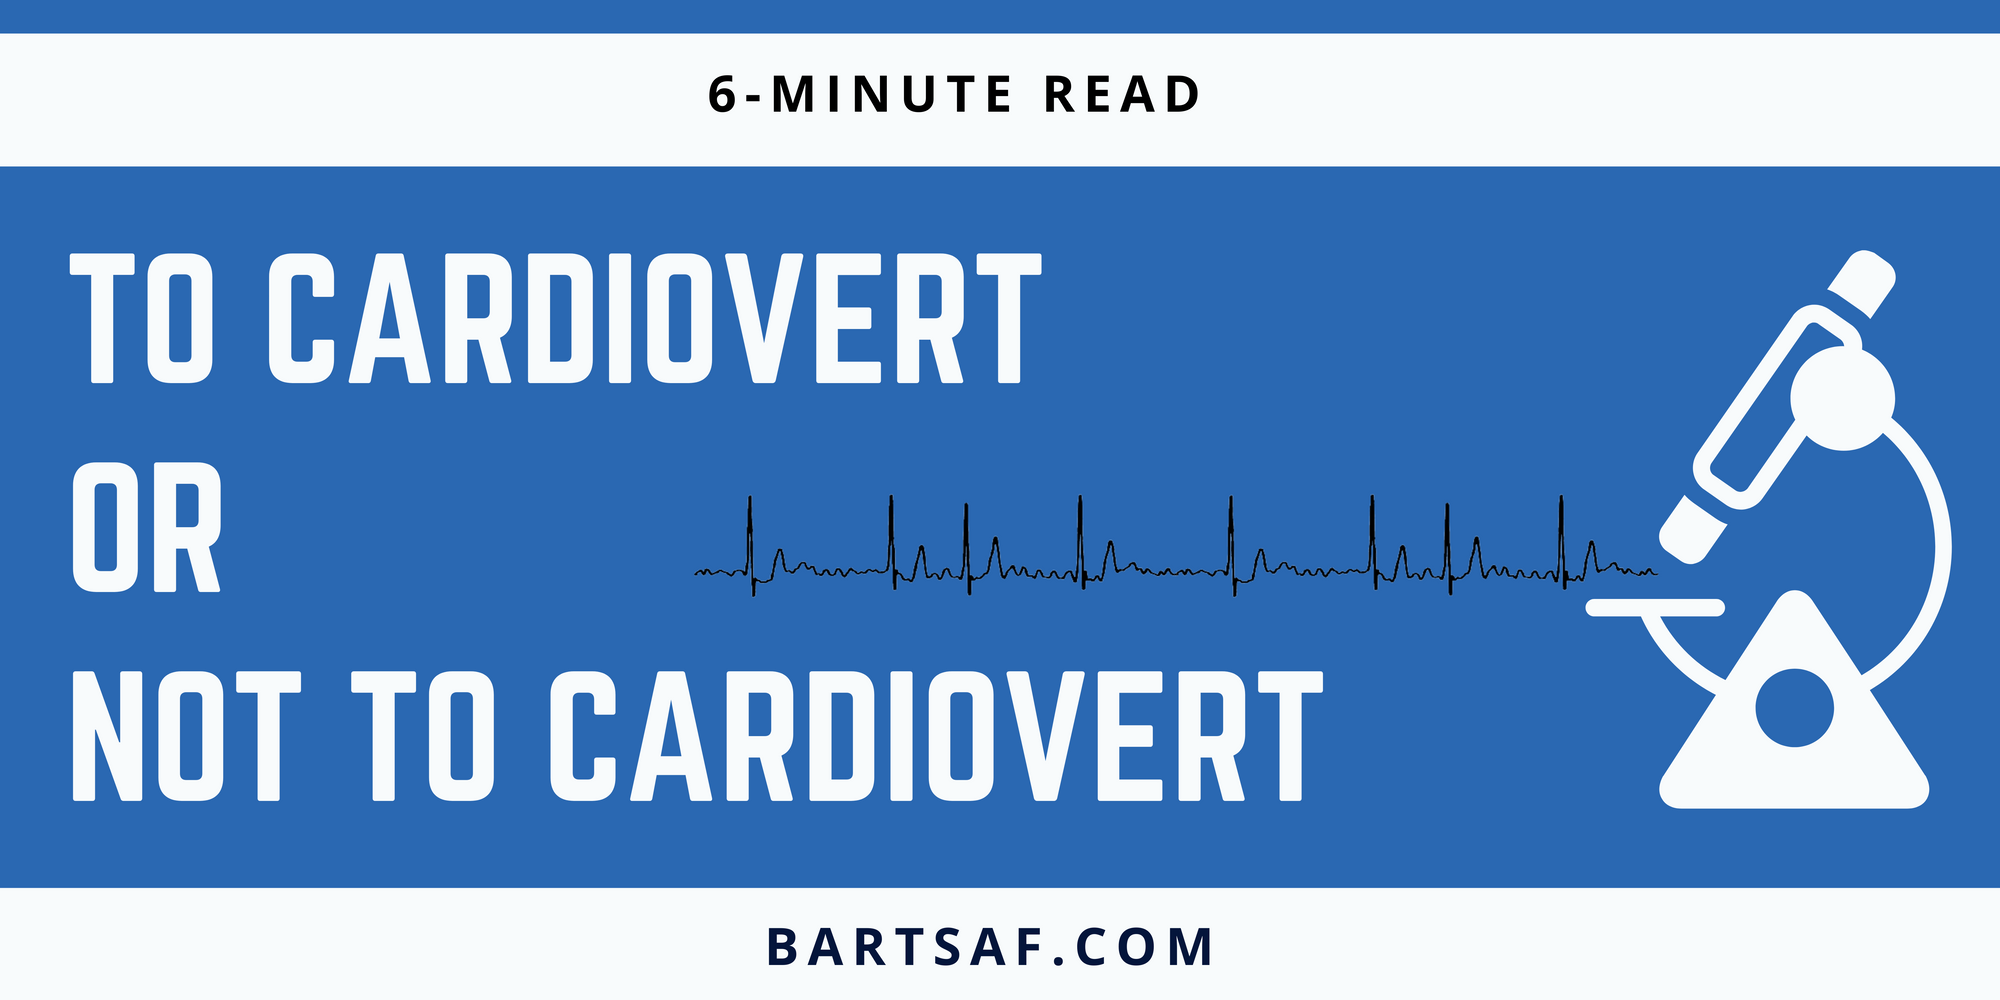 To cardiovert or not cardiovert?